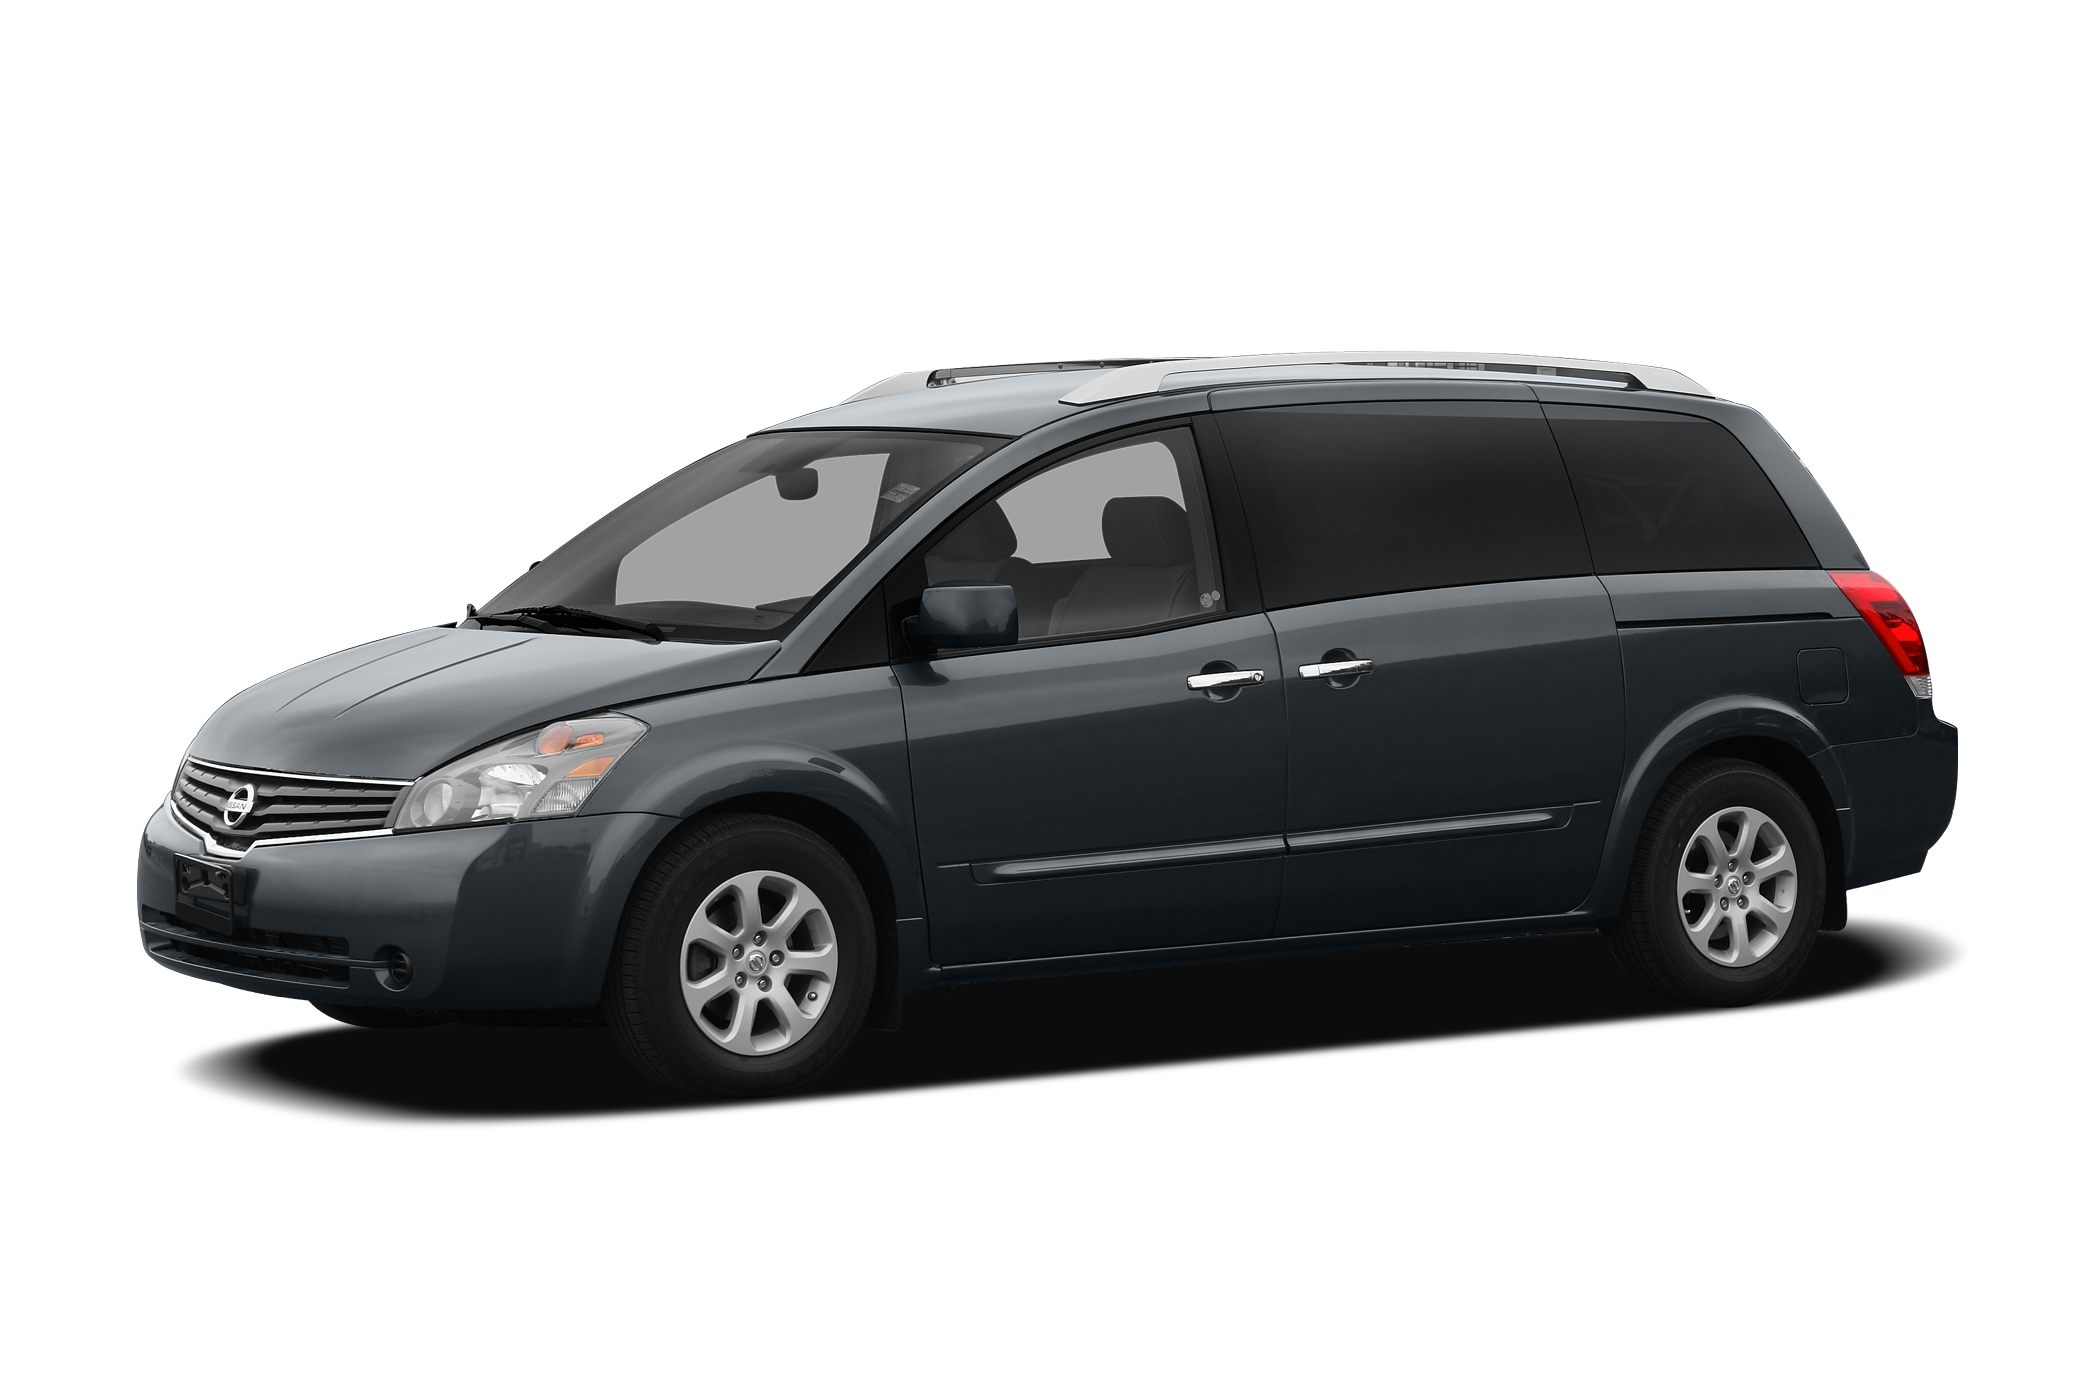 2006 Nissan Quest Owner Reviews and Ratings